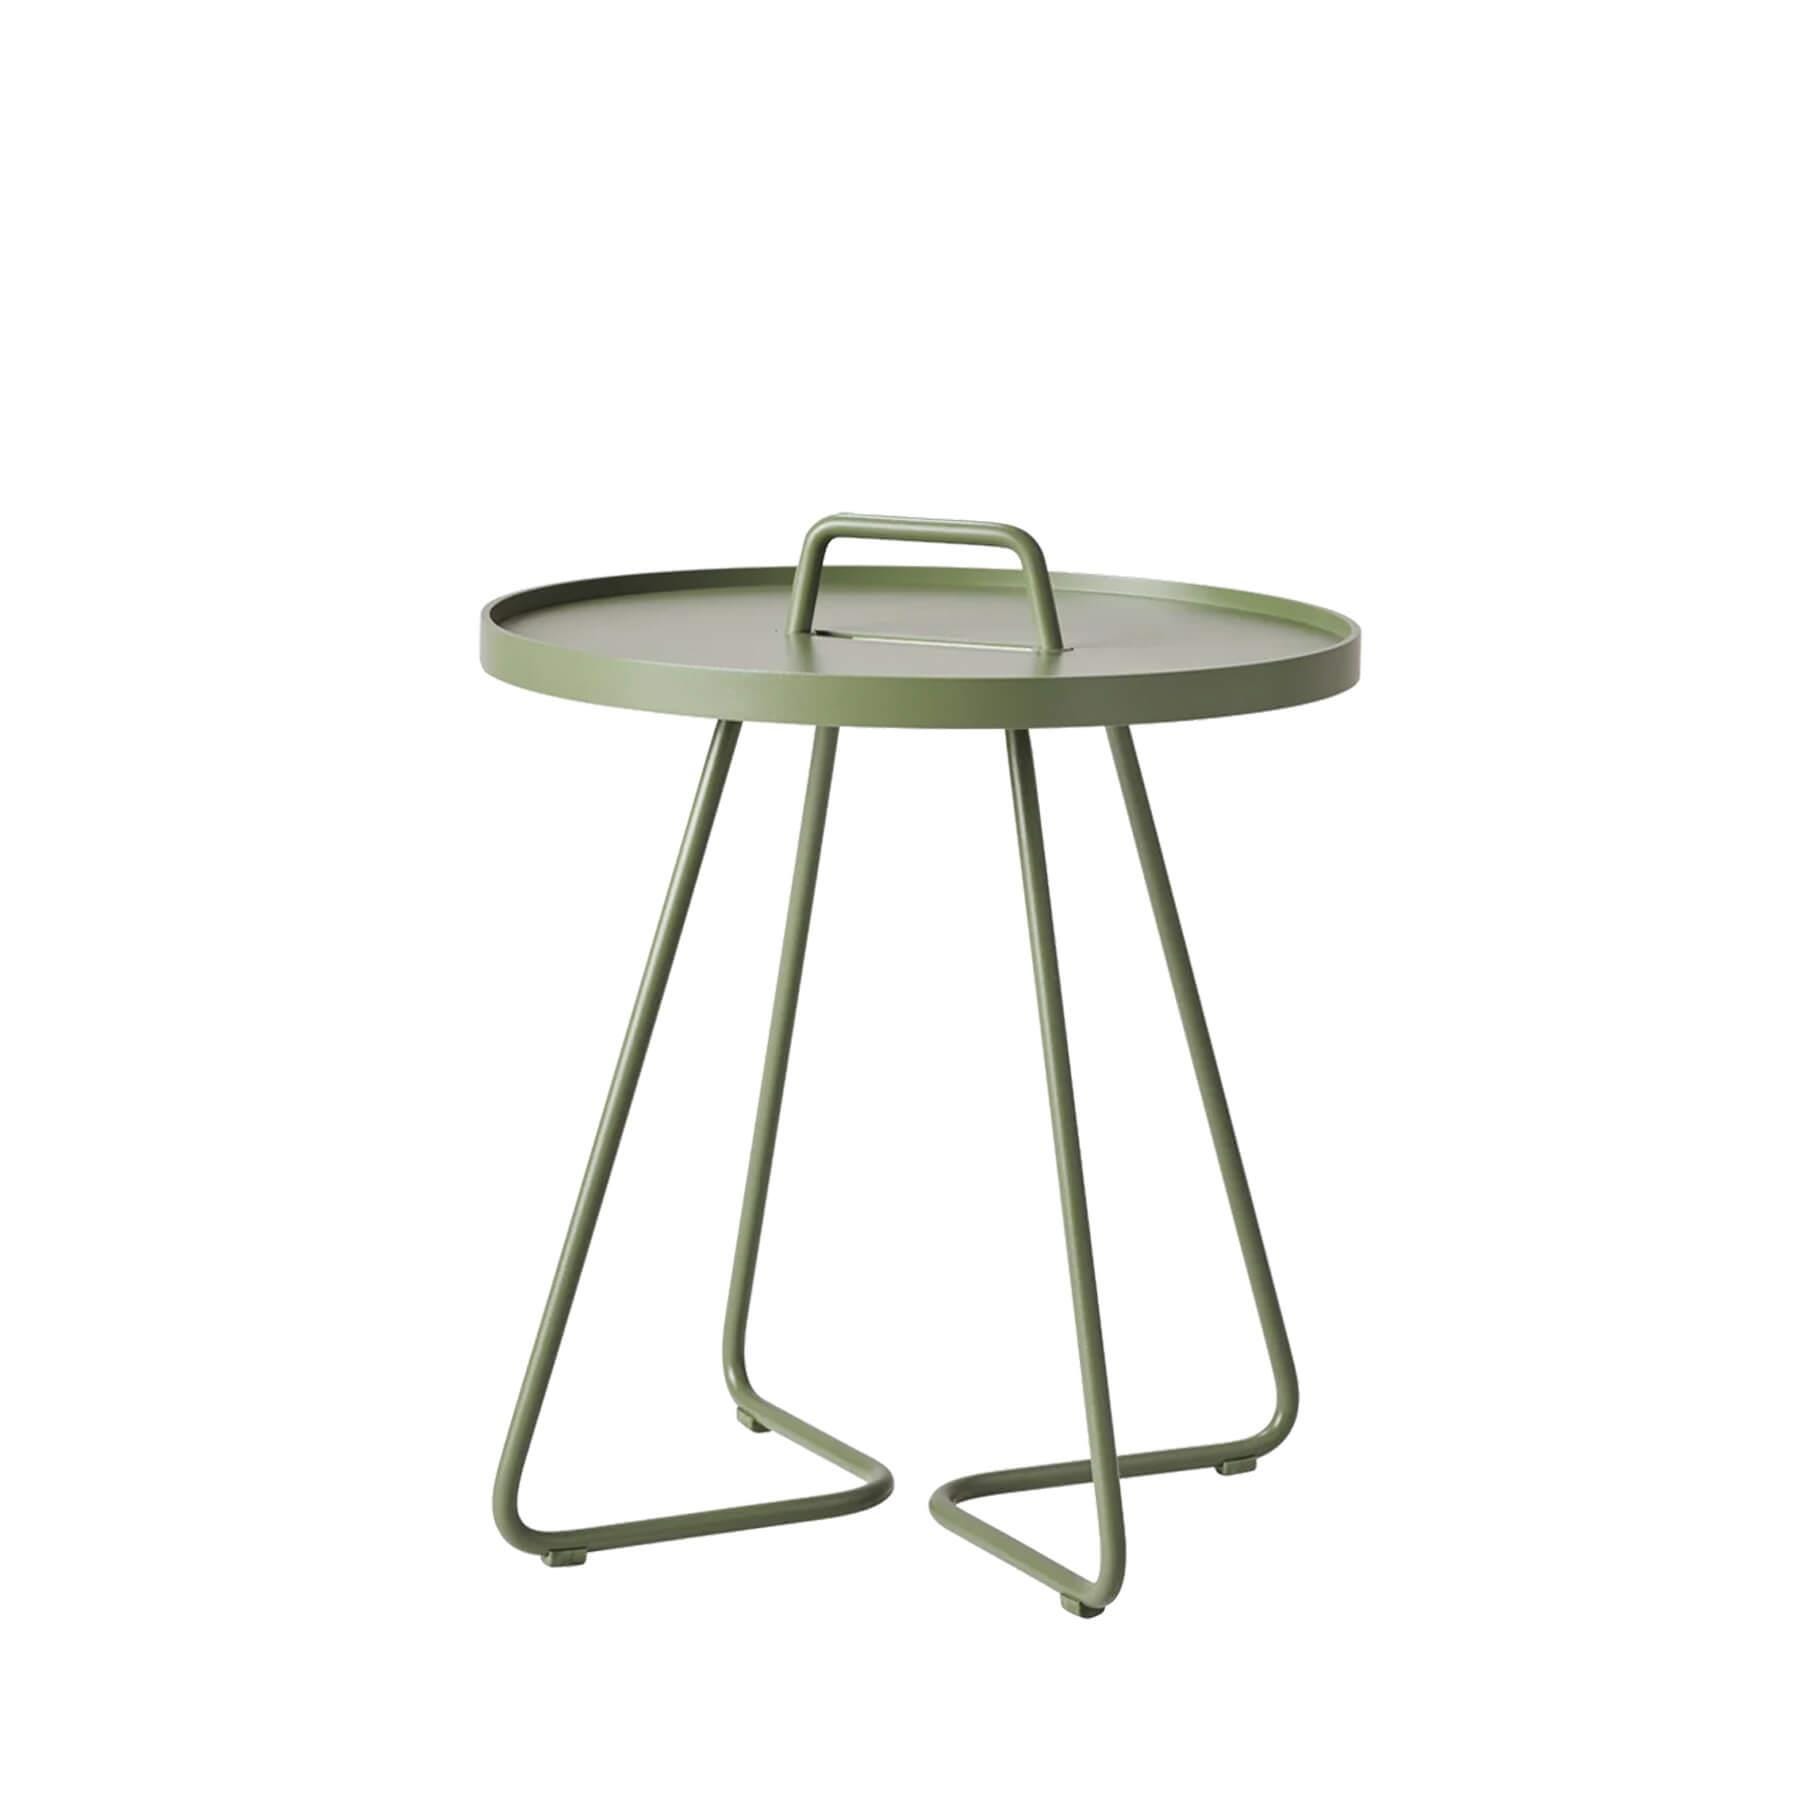 Caneline On The Move Side Table Small Olive Green Designer Furniture From Holloways Of Ludlow